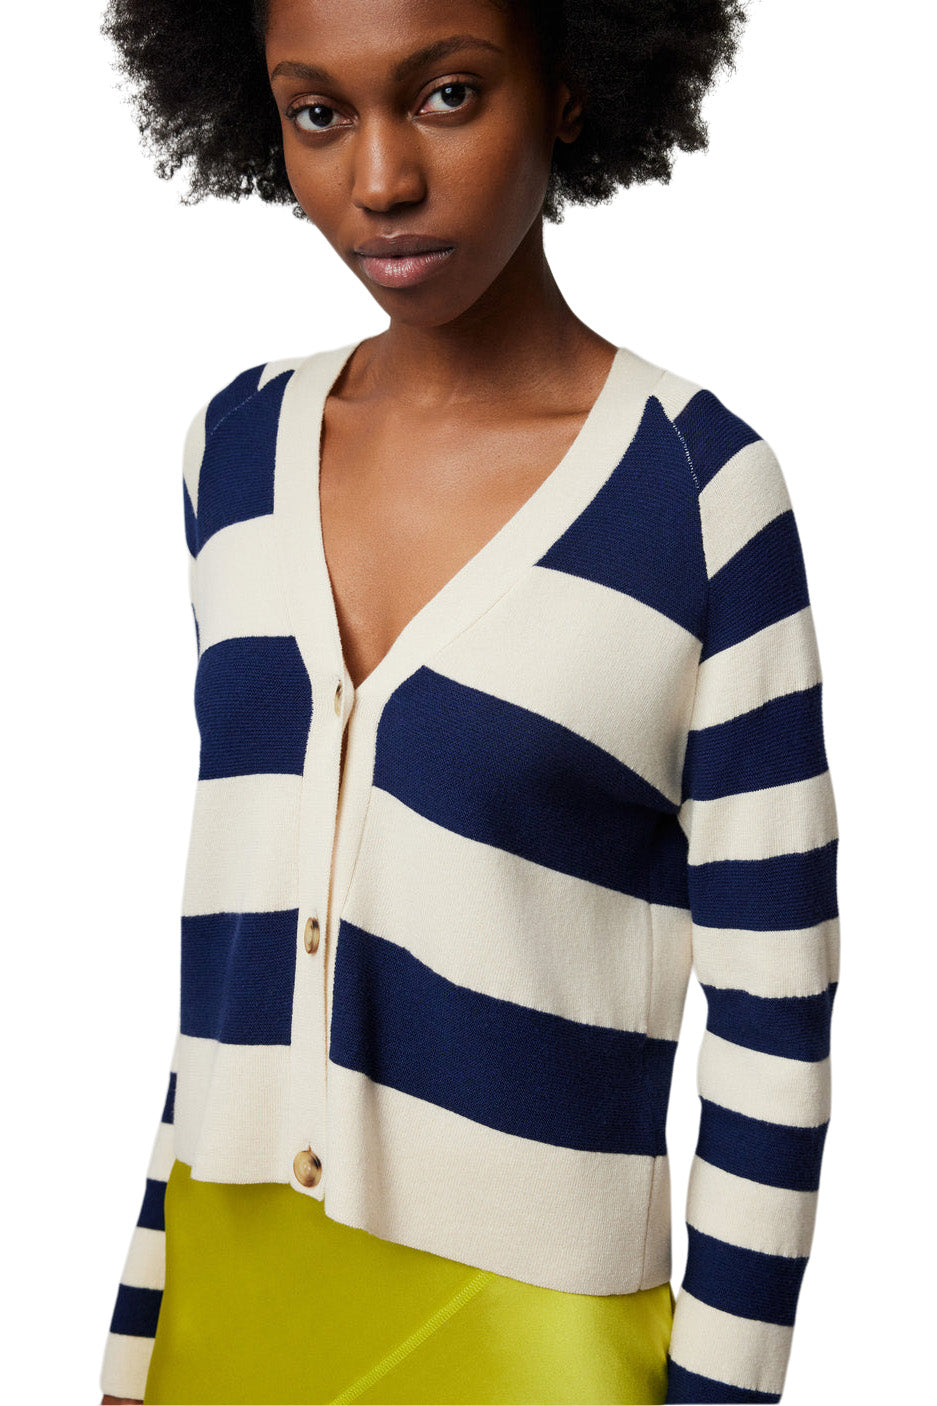 ATM Cotton Blend Mixed Stripe Cardigan in Chalk-Ink